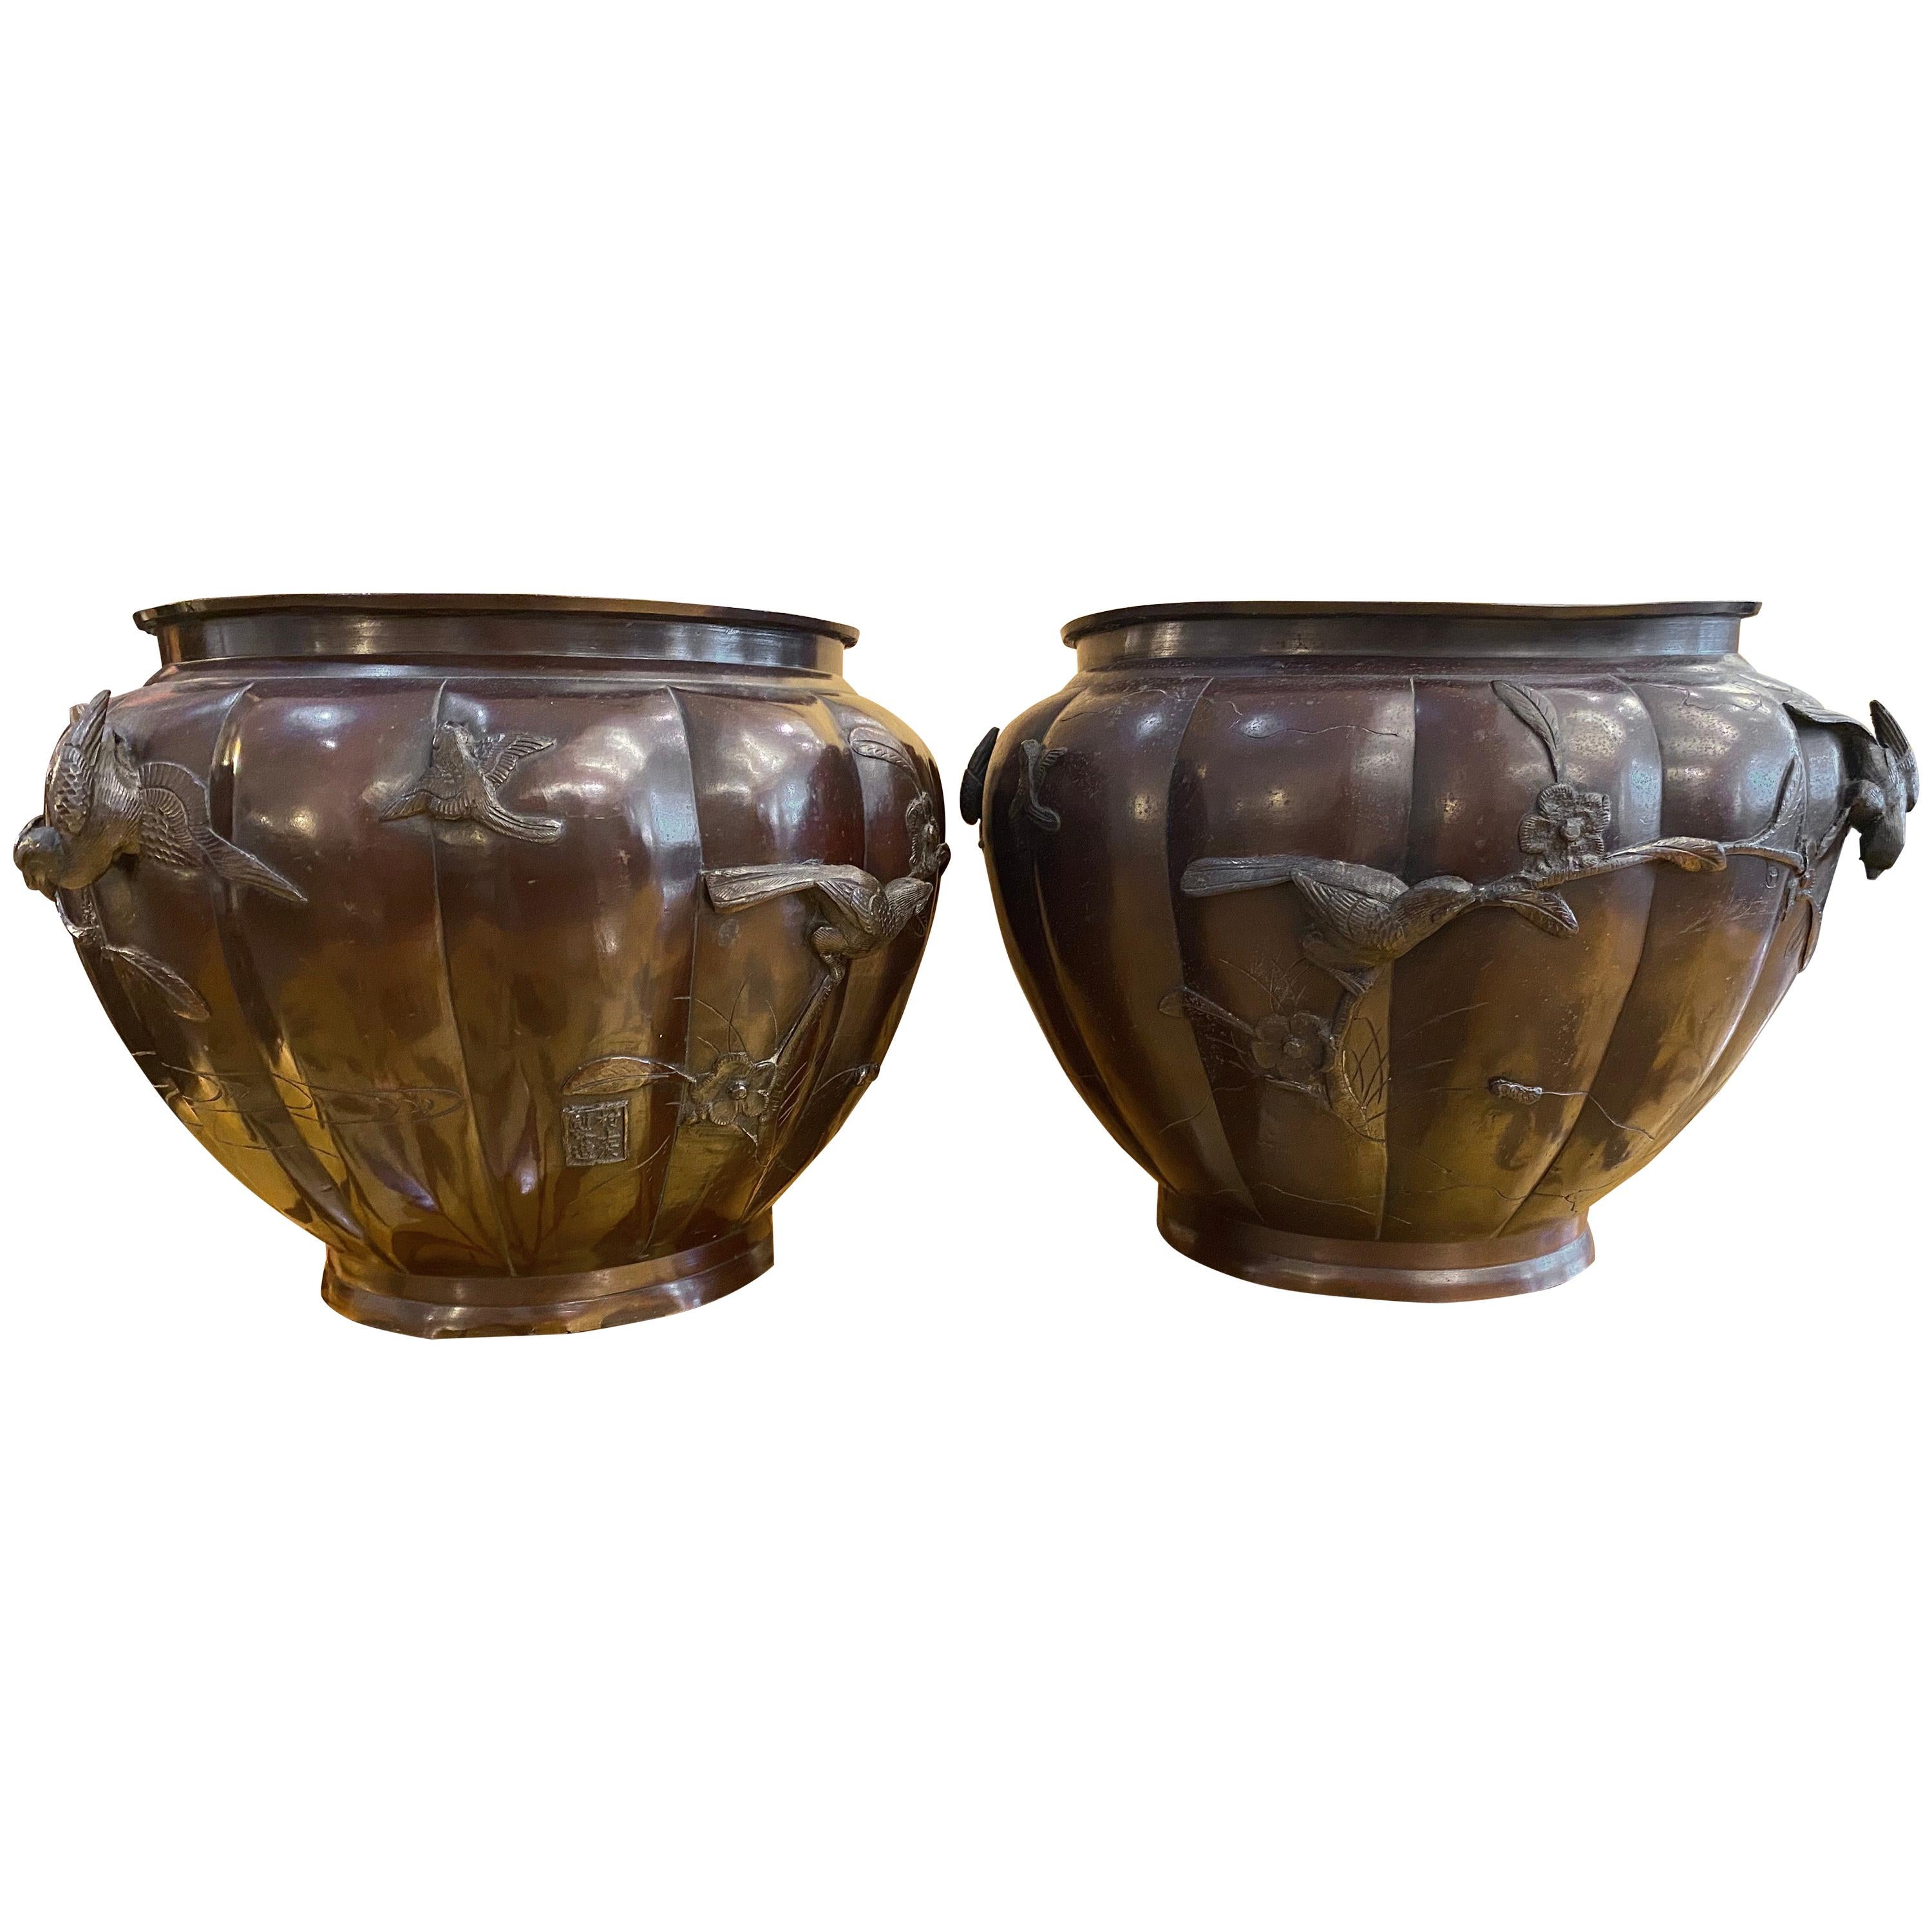 Pair of Lobed Bronze Japanese Planters For Sale